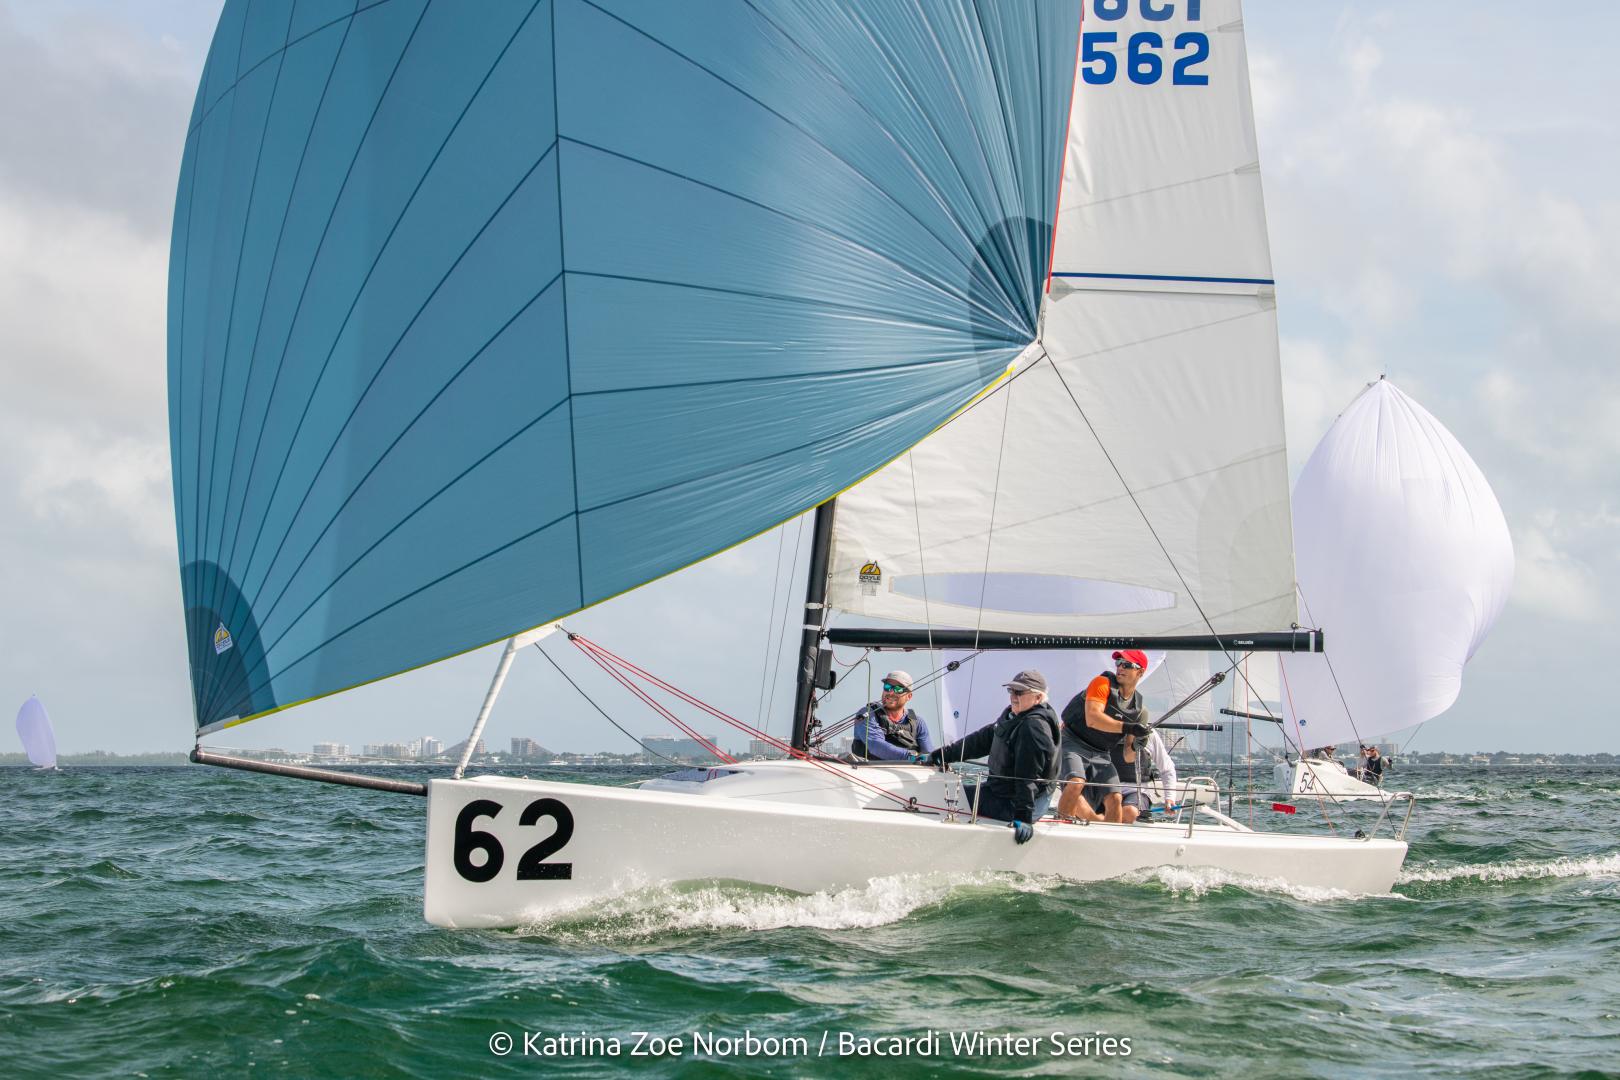 Richard Witzel on 'Rowdy' secures J/70 glory and Melges 24 top billing goes to Laura Grondin on 'Dark Energy'